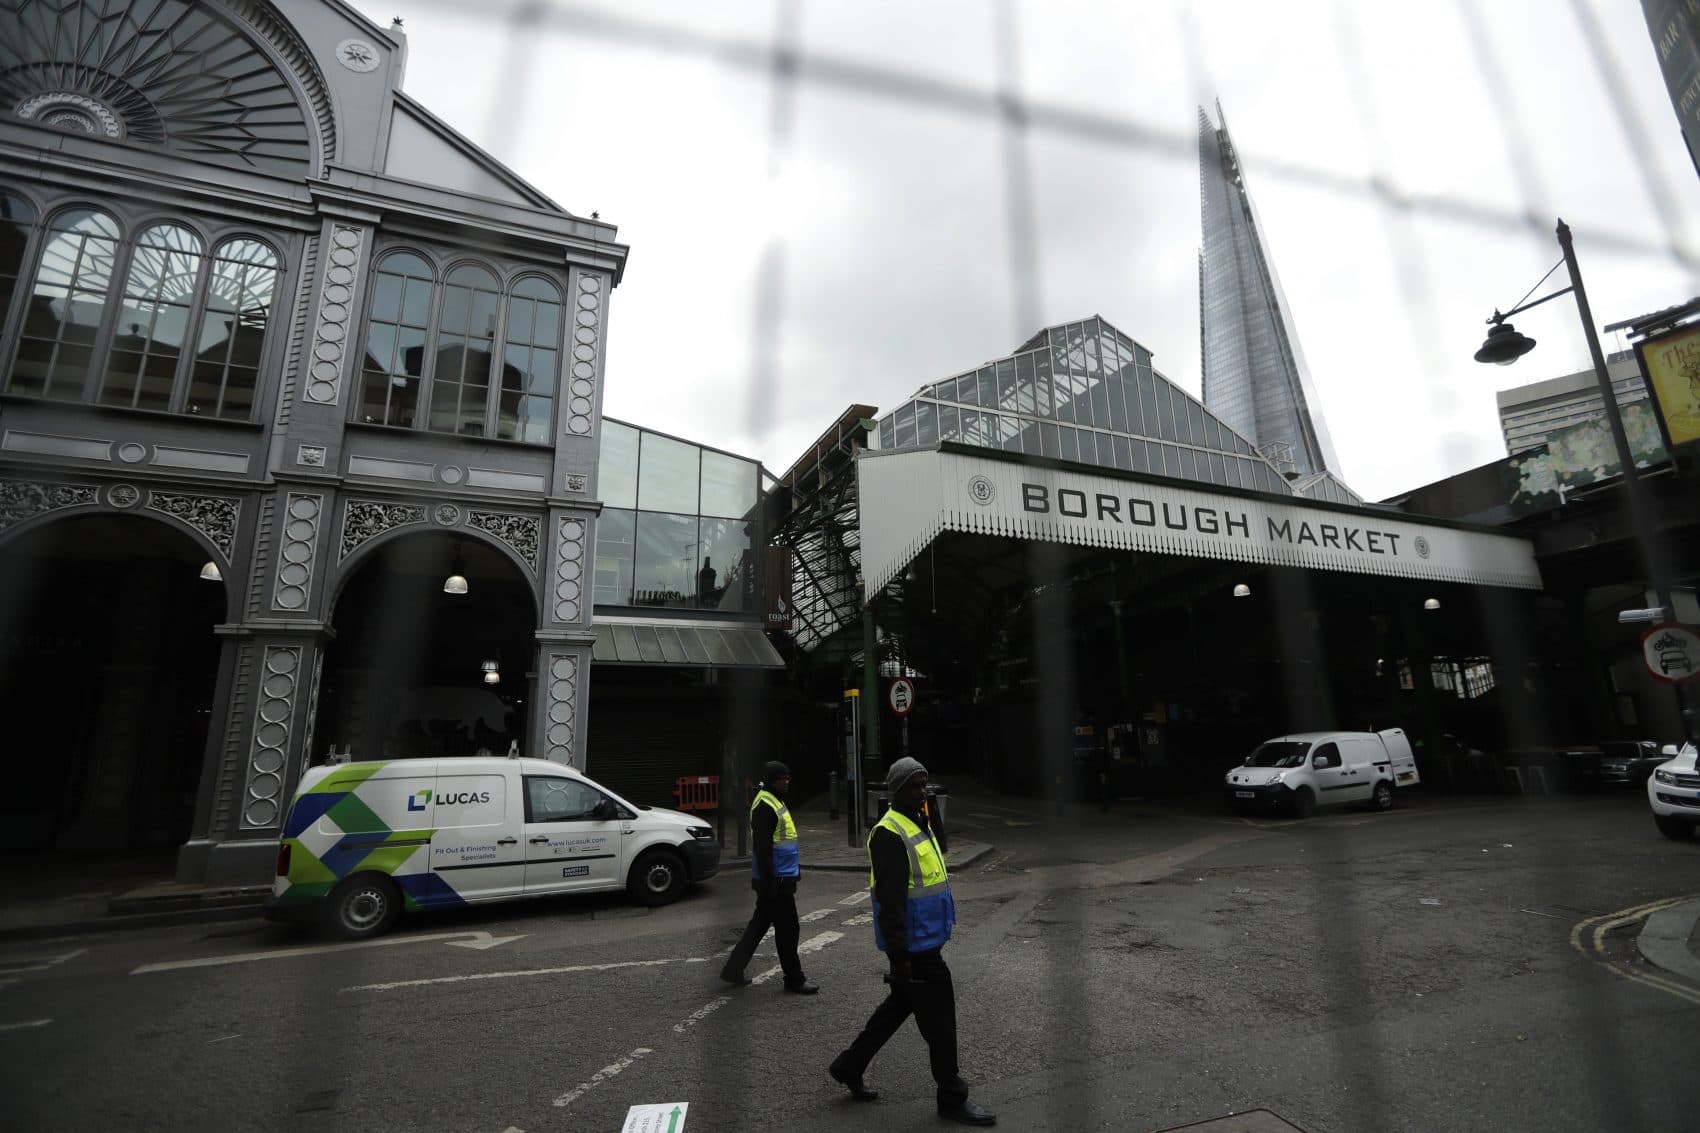 Security marshals are seen through a fence walking beside Borough market, in London, which remains closed to the public after the attack that took place there, Monday, June 12, 2017. (Matt Dunham/AP)